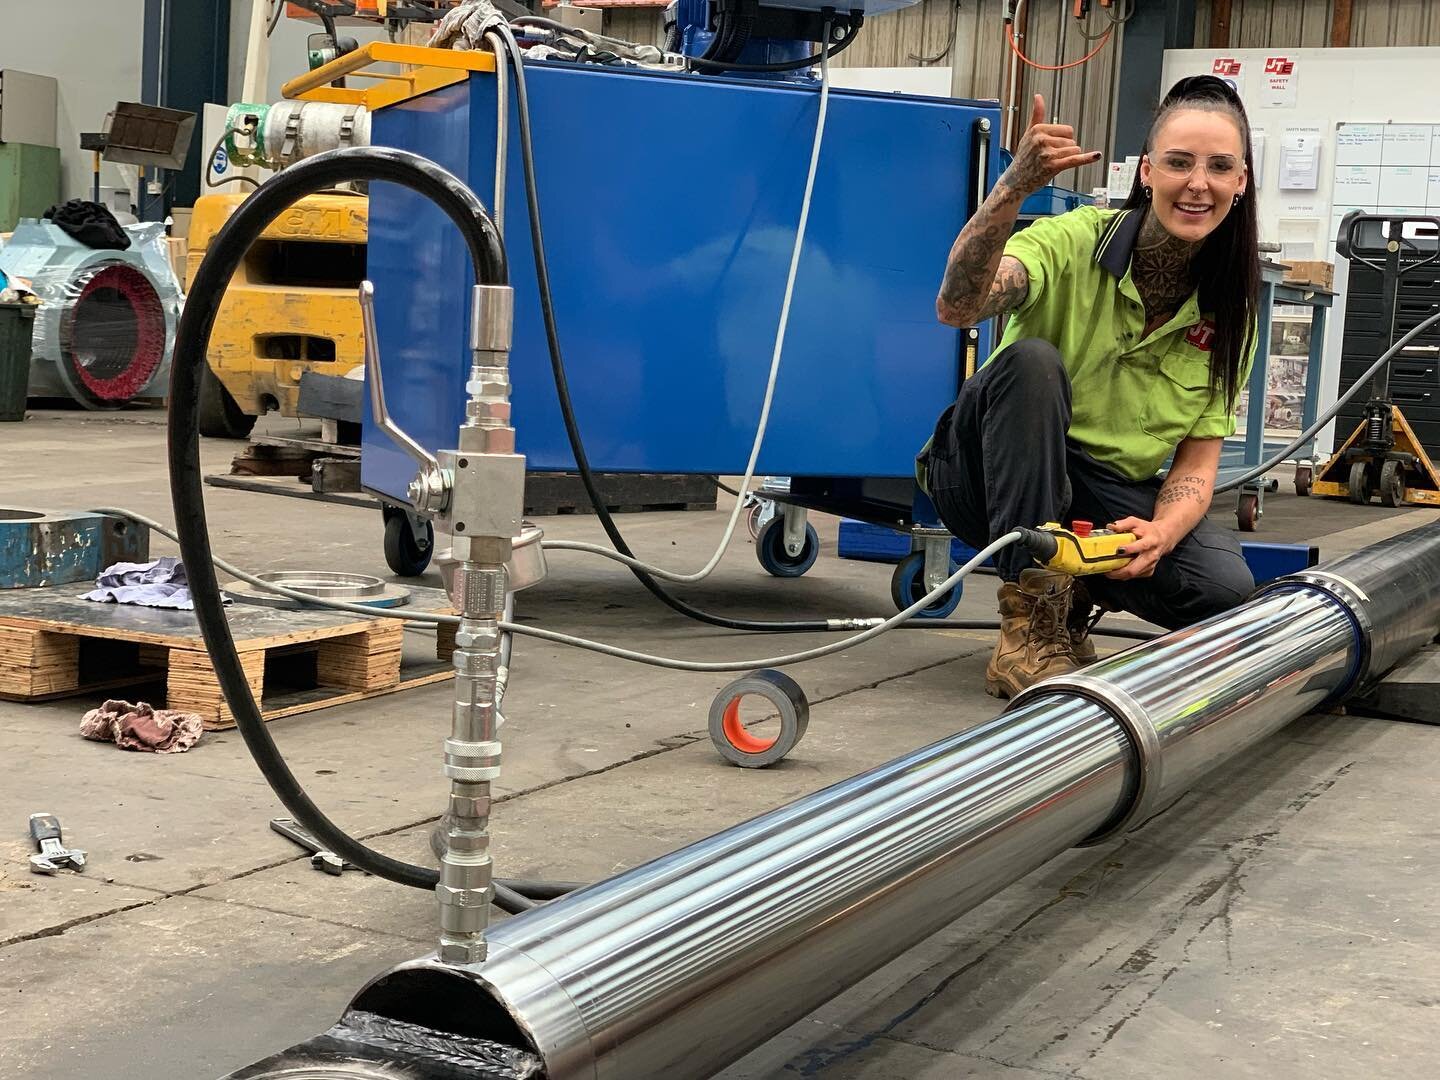 Coryn chucks a 🤙 on the final 3000psi pressure test of this twin stage hydraulic cylinder refurbishment. 
One Stop Shop!

JTE Est 1934.
Australian Engineering at its best. #machineshop 
#engineeringworkshop #melbourne #australia #millingmachine #lat